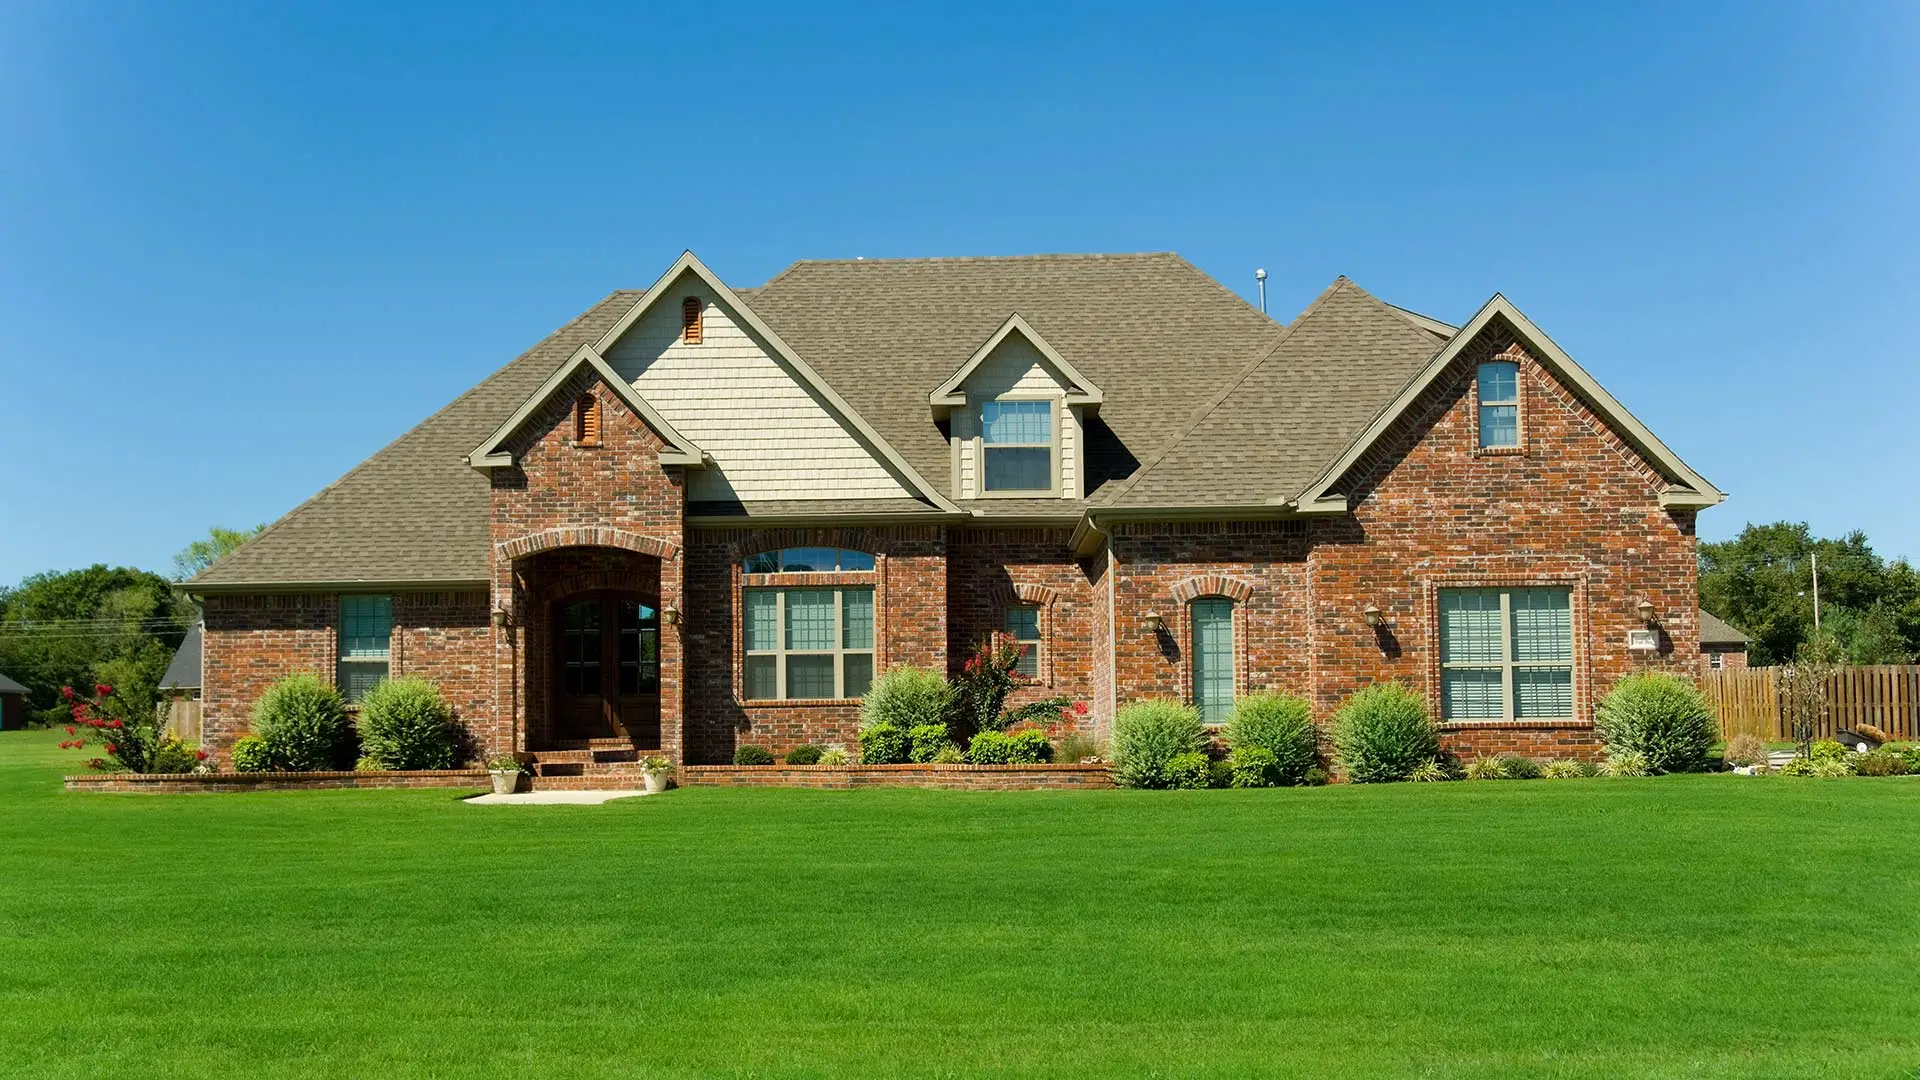 Home front with a healthy well maintained landscape near Collierville, TN.